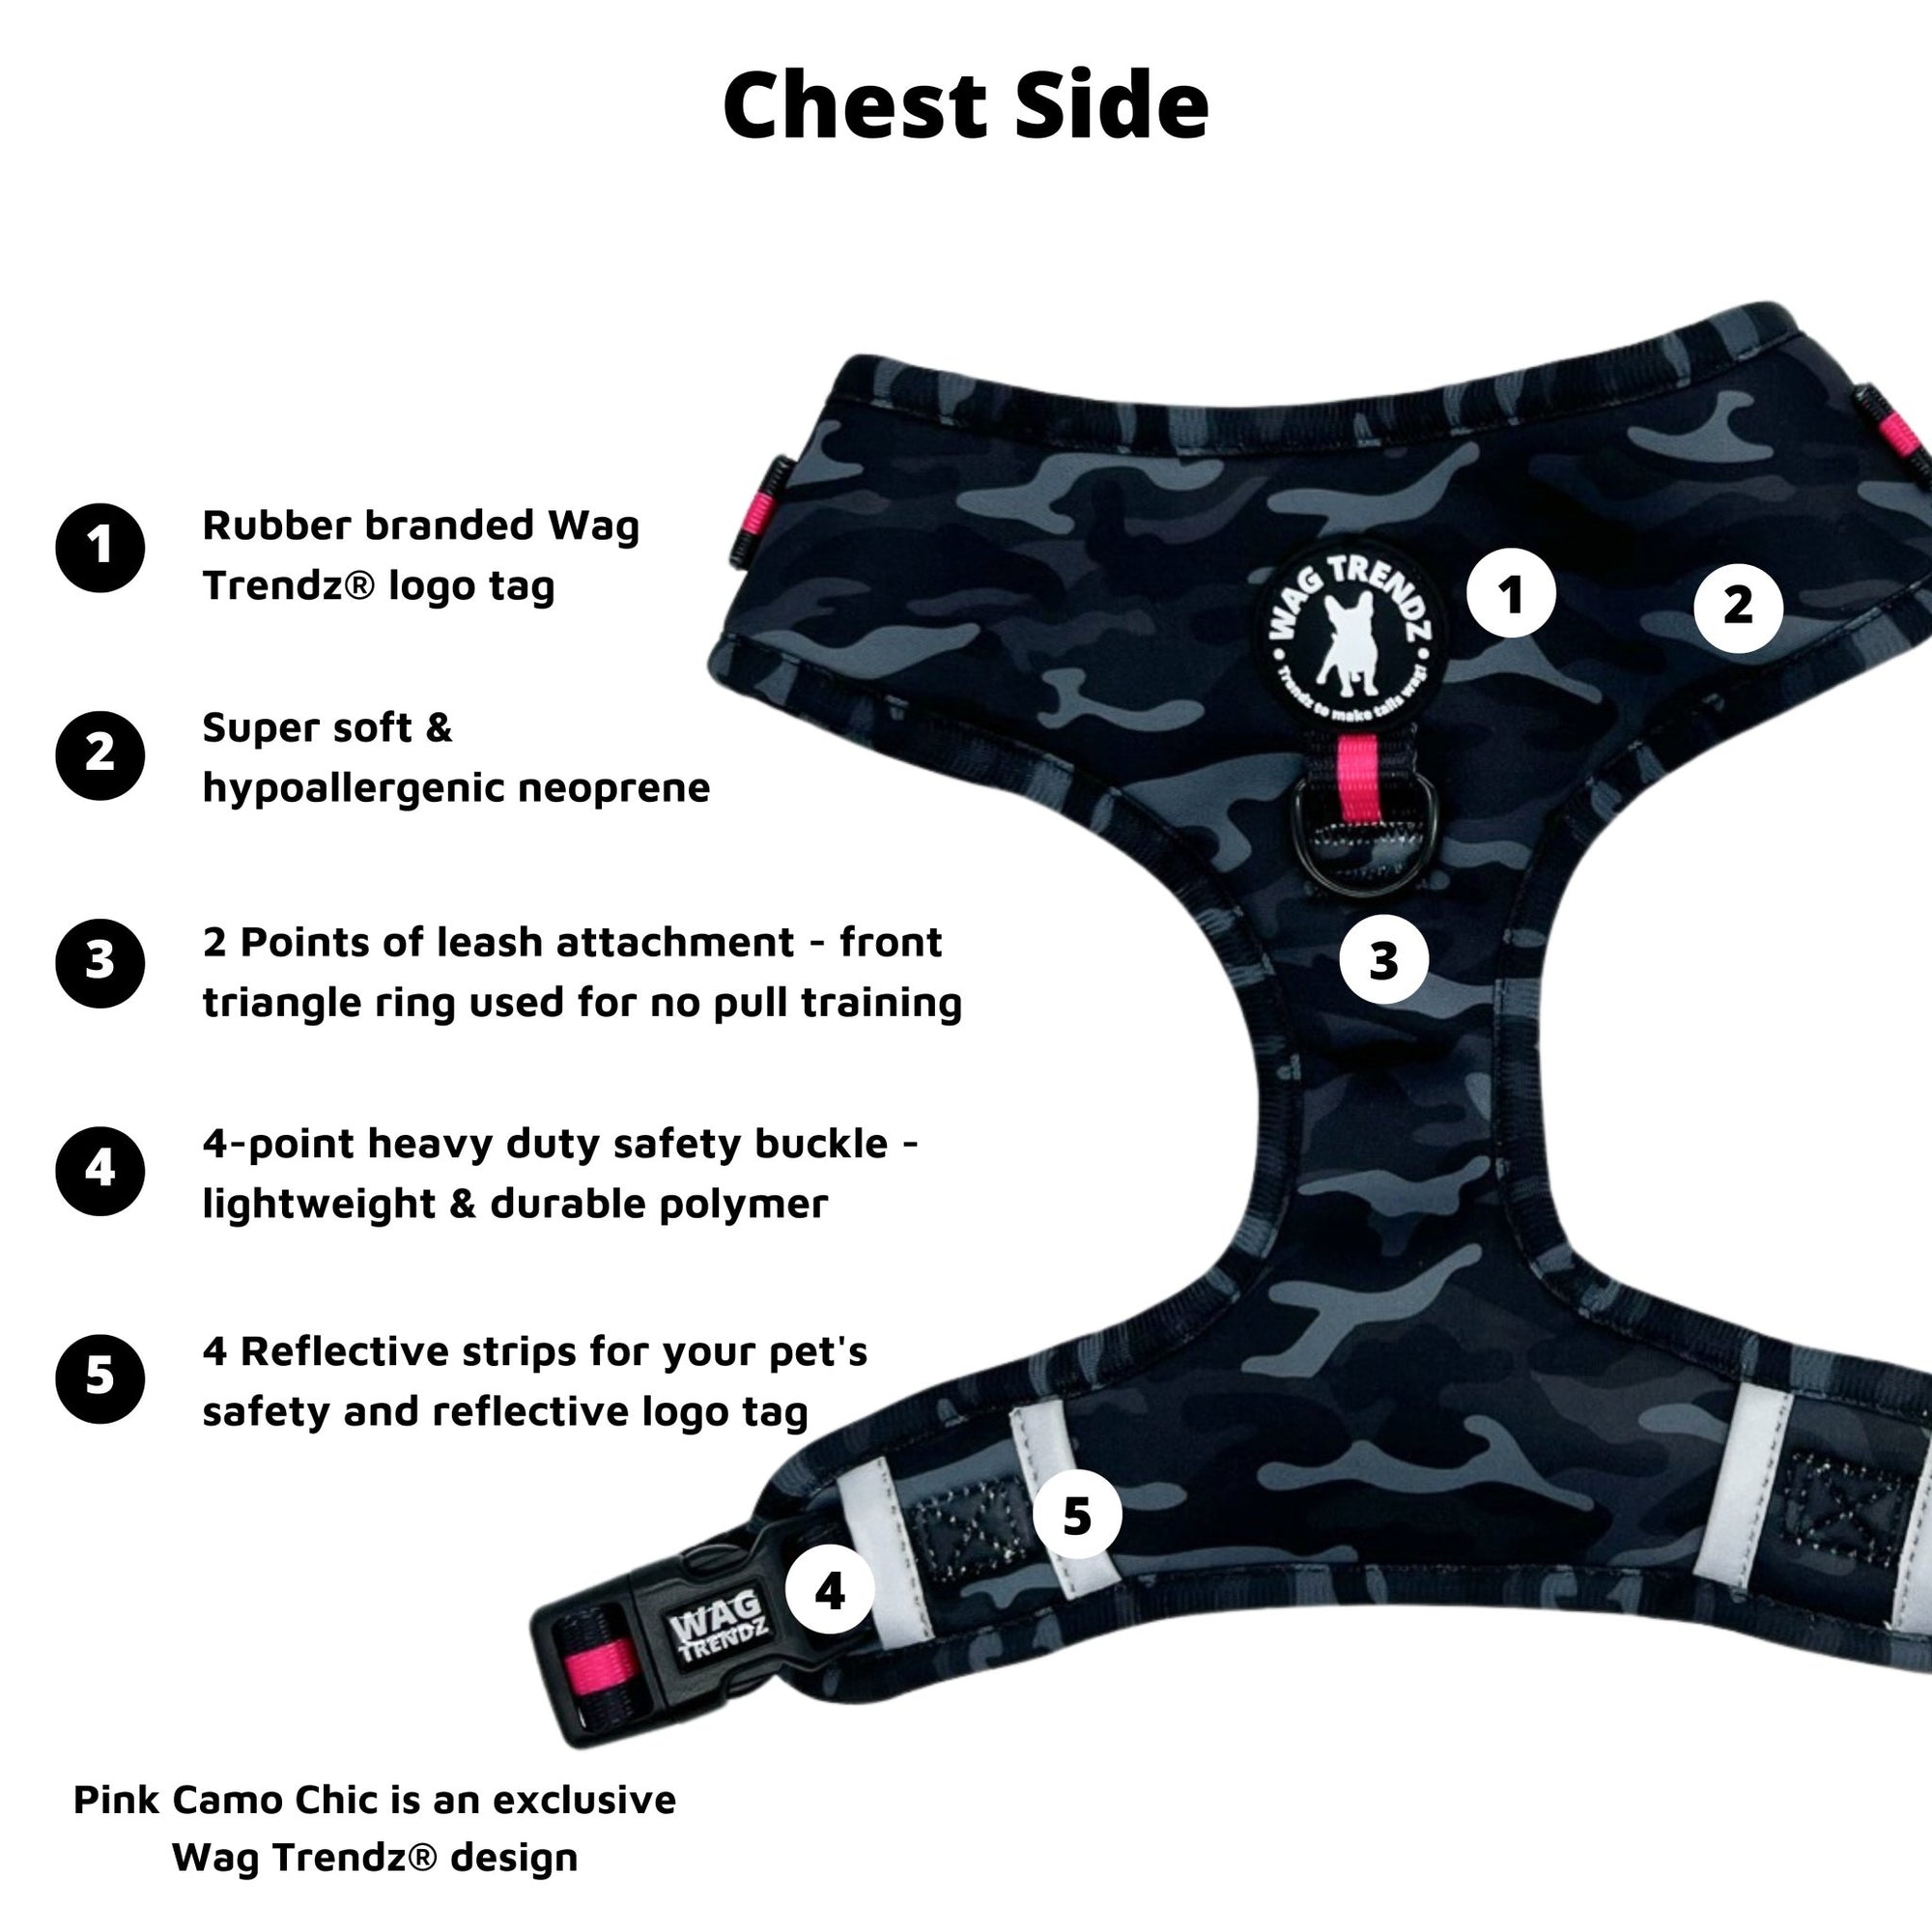 No Pull Dog Harness - black and gray camo adjustable harness with hot pink accents and a front clip for pull training - chest view against a solid white background with product feature captions - Wag Trendz